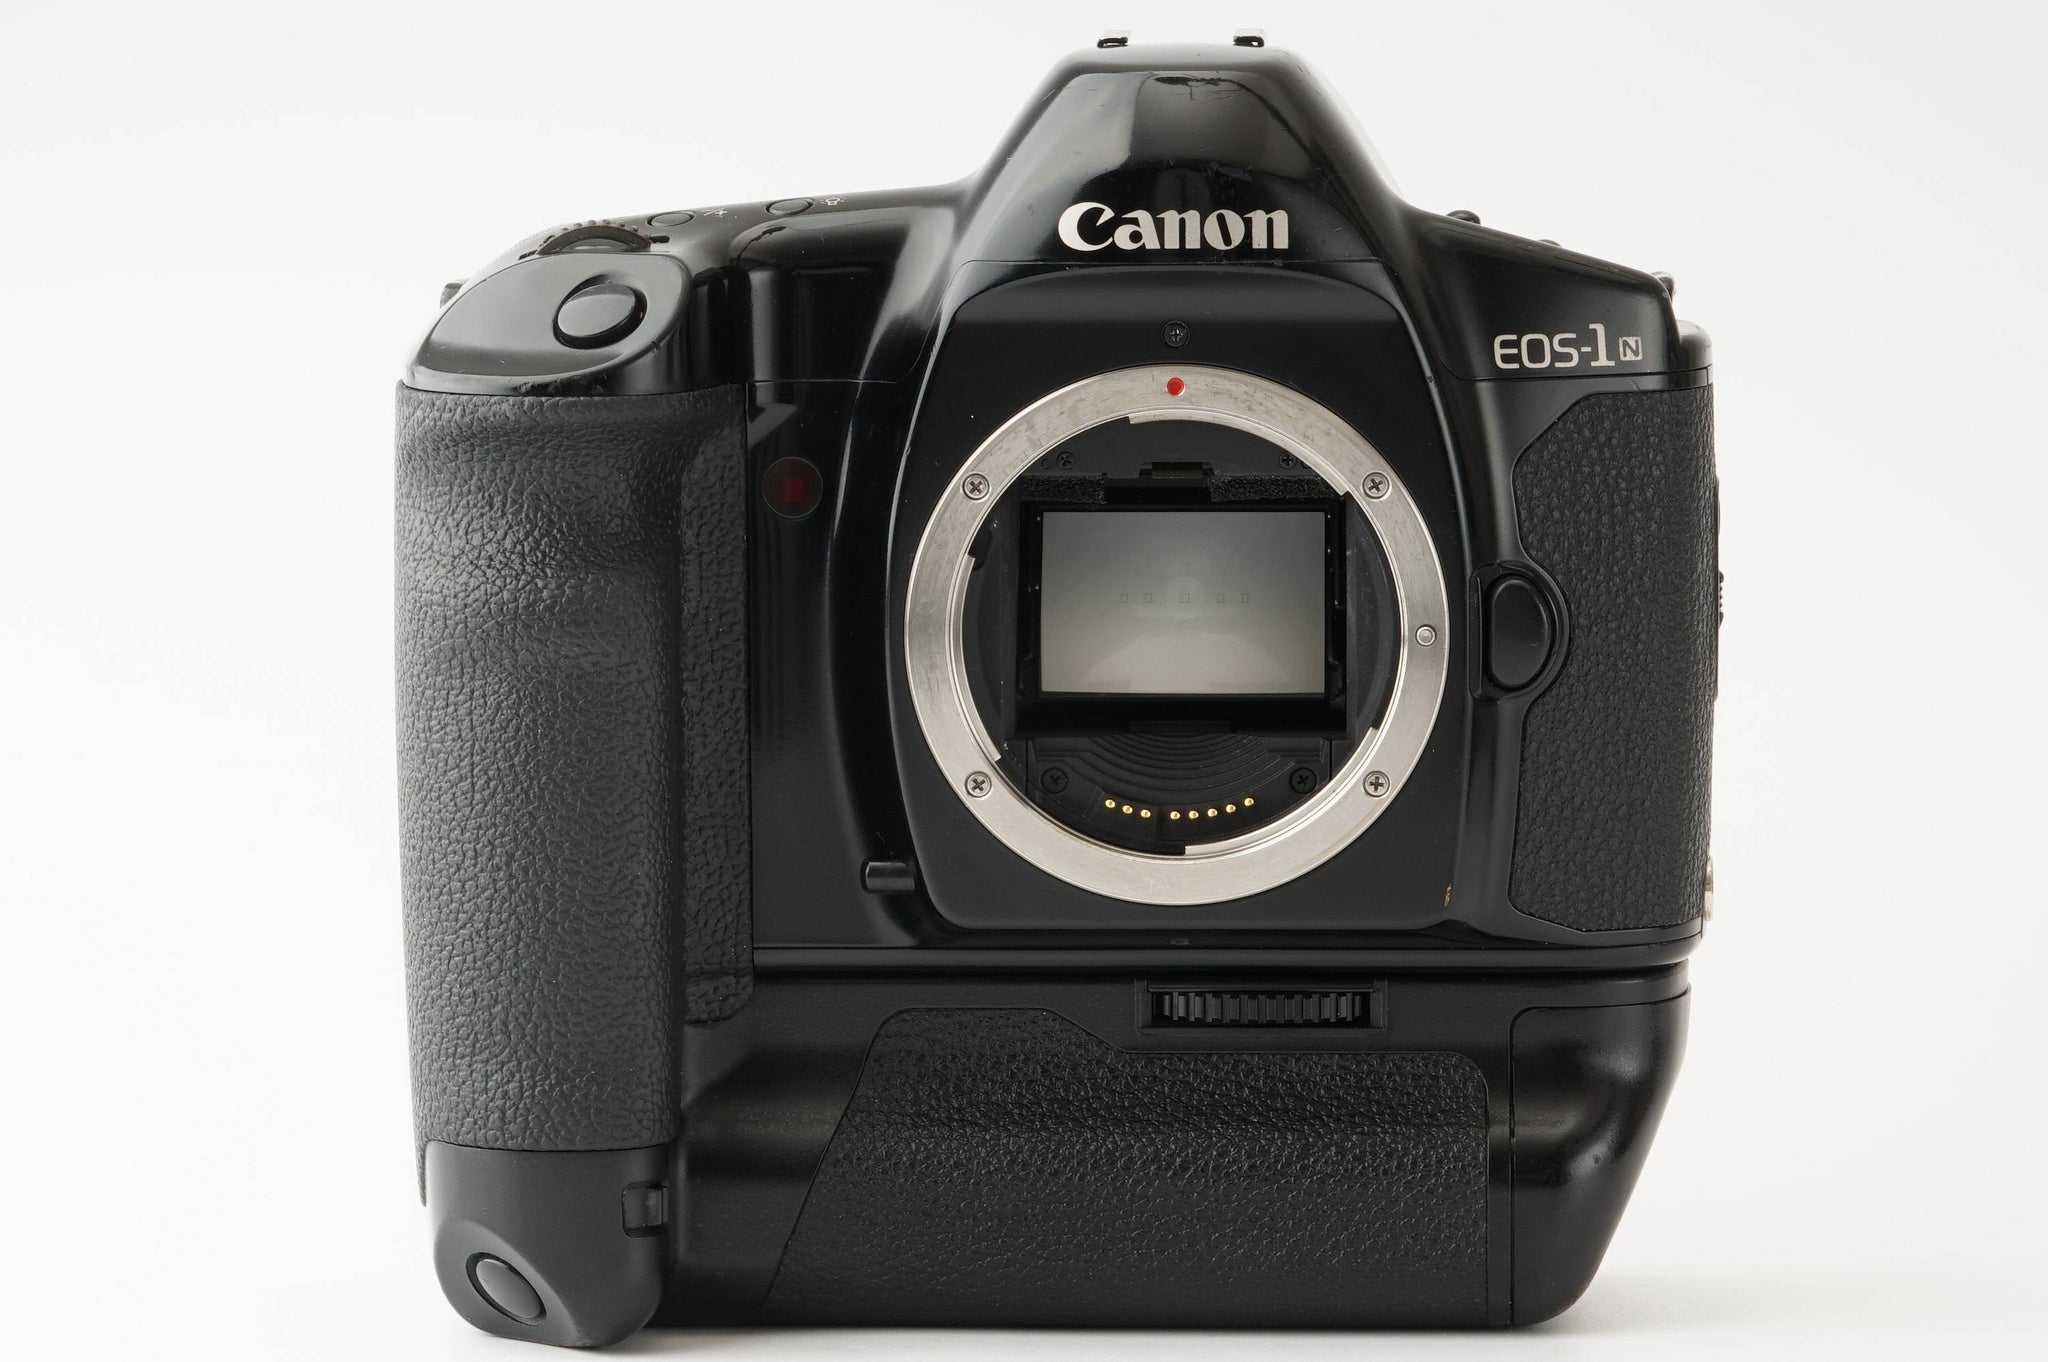 Canon キヤノンEOS-1N POWER DRIVE BOOSTER E1-